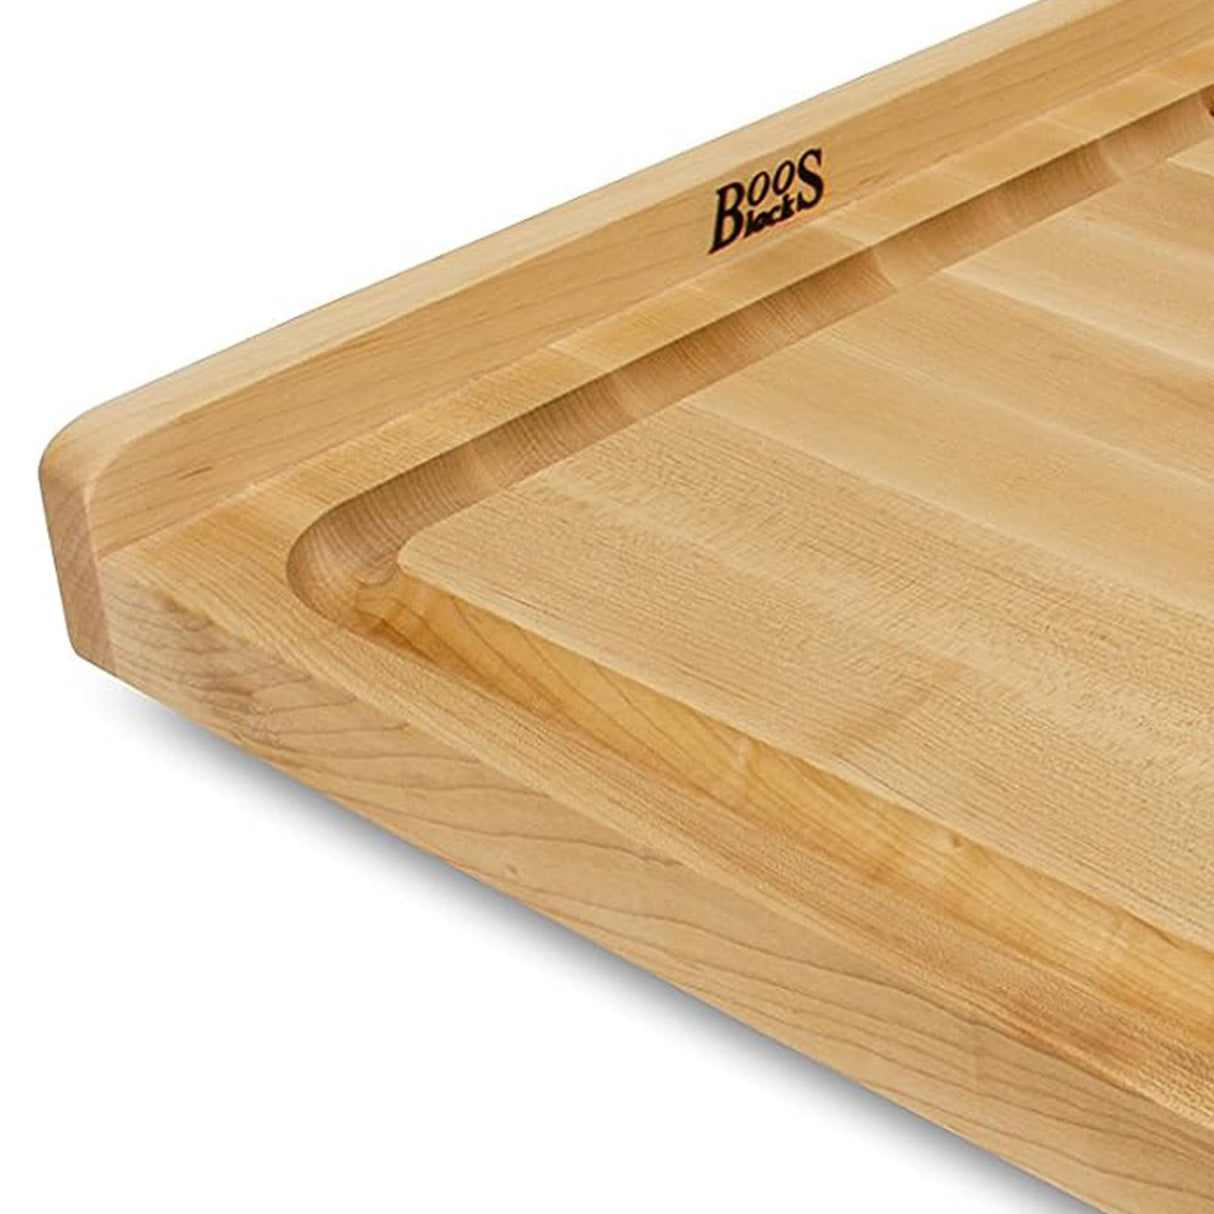 John Boos KNEB17 Maple Wood Cutting Board for Kitchen Prep, 17.75" x 17.25", 1.25 Inch Thick, Edge Grain Reversible Charcuterie Block with Juice Groove 17.75X17.25 MPL-EDGE GR-KNEAD BRD-